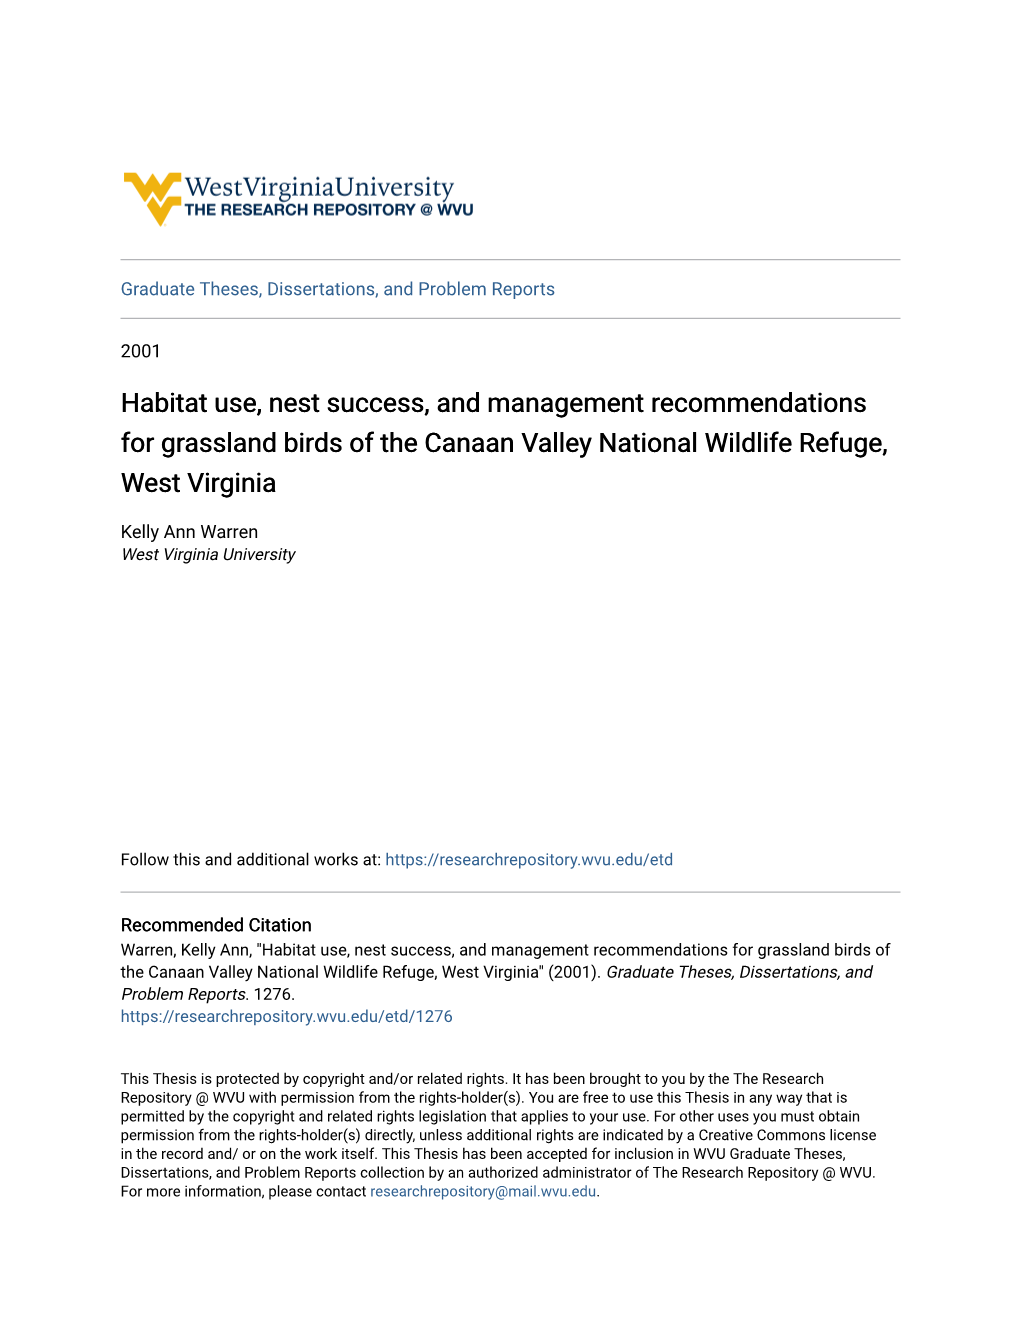 Habitat Use, Nest Success, and Management Recommendations for Grassland Birds of the Canaan Valley National Wildlife Refuge, West Virginia